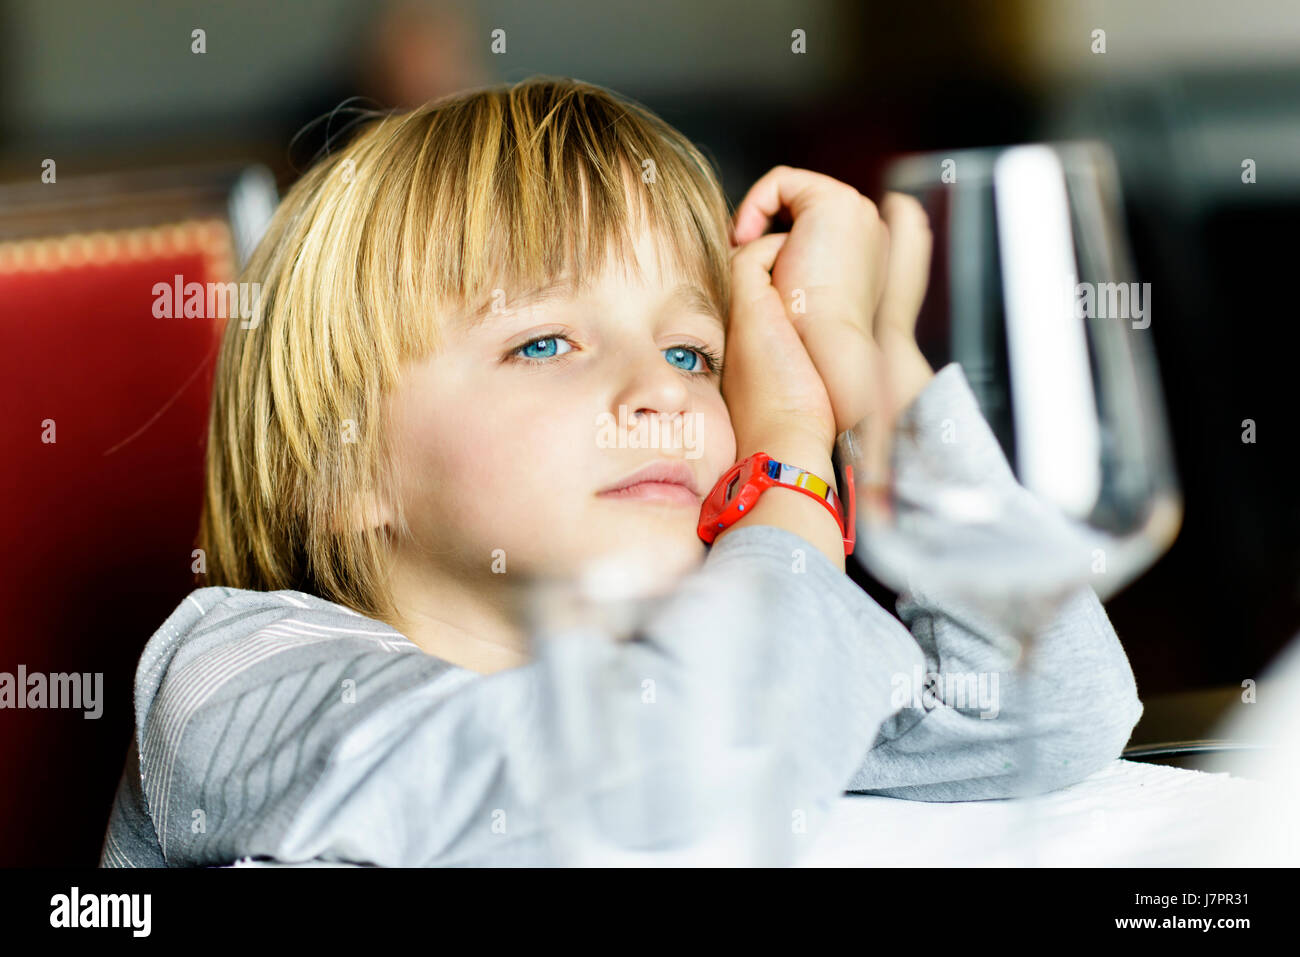 A serious child sitting alone at table in a restaurant Stock Photo